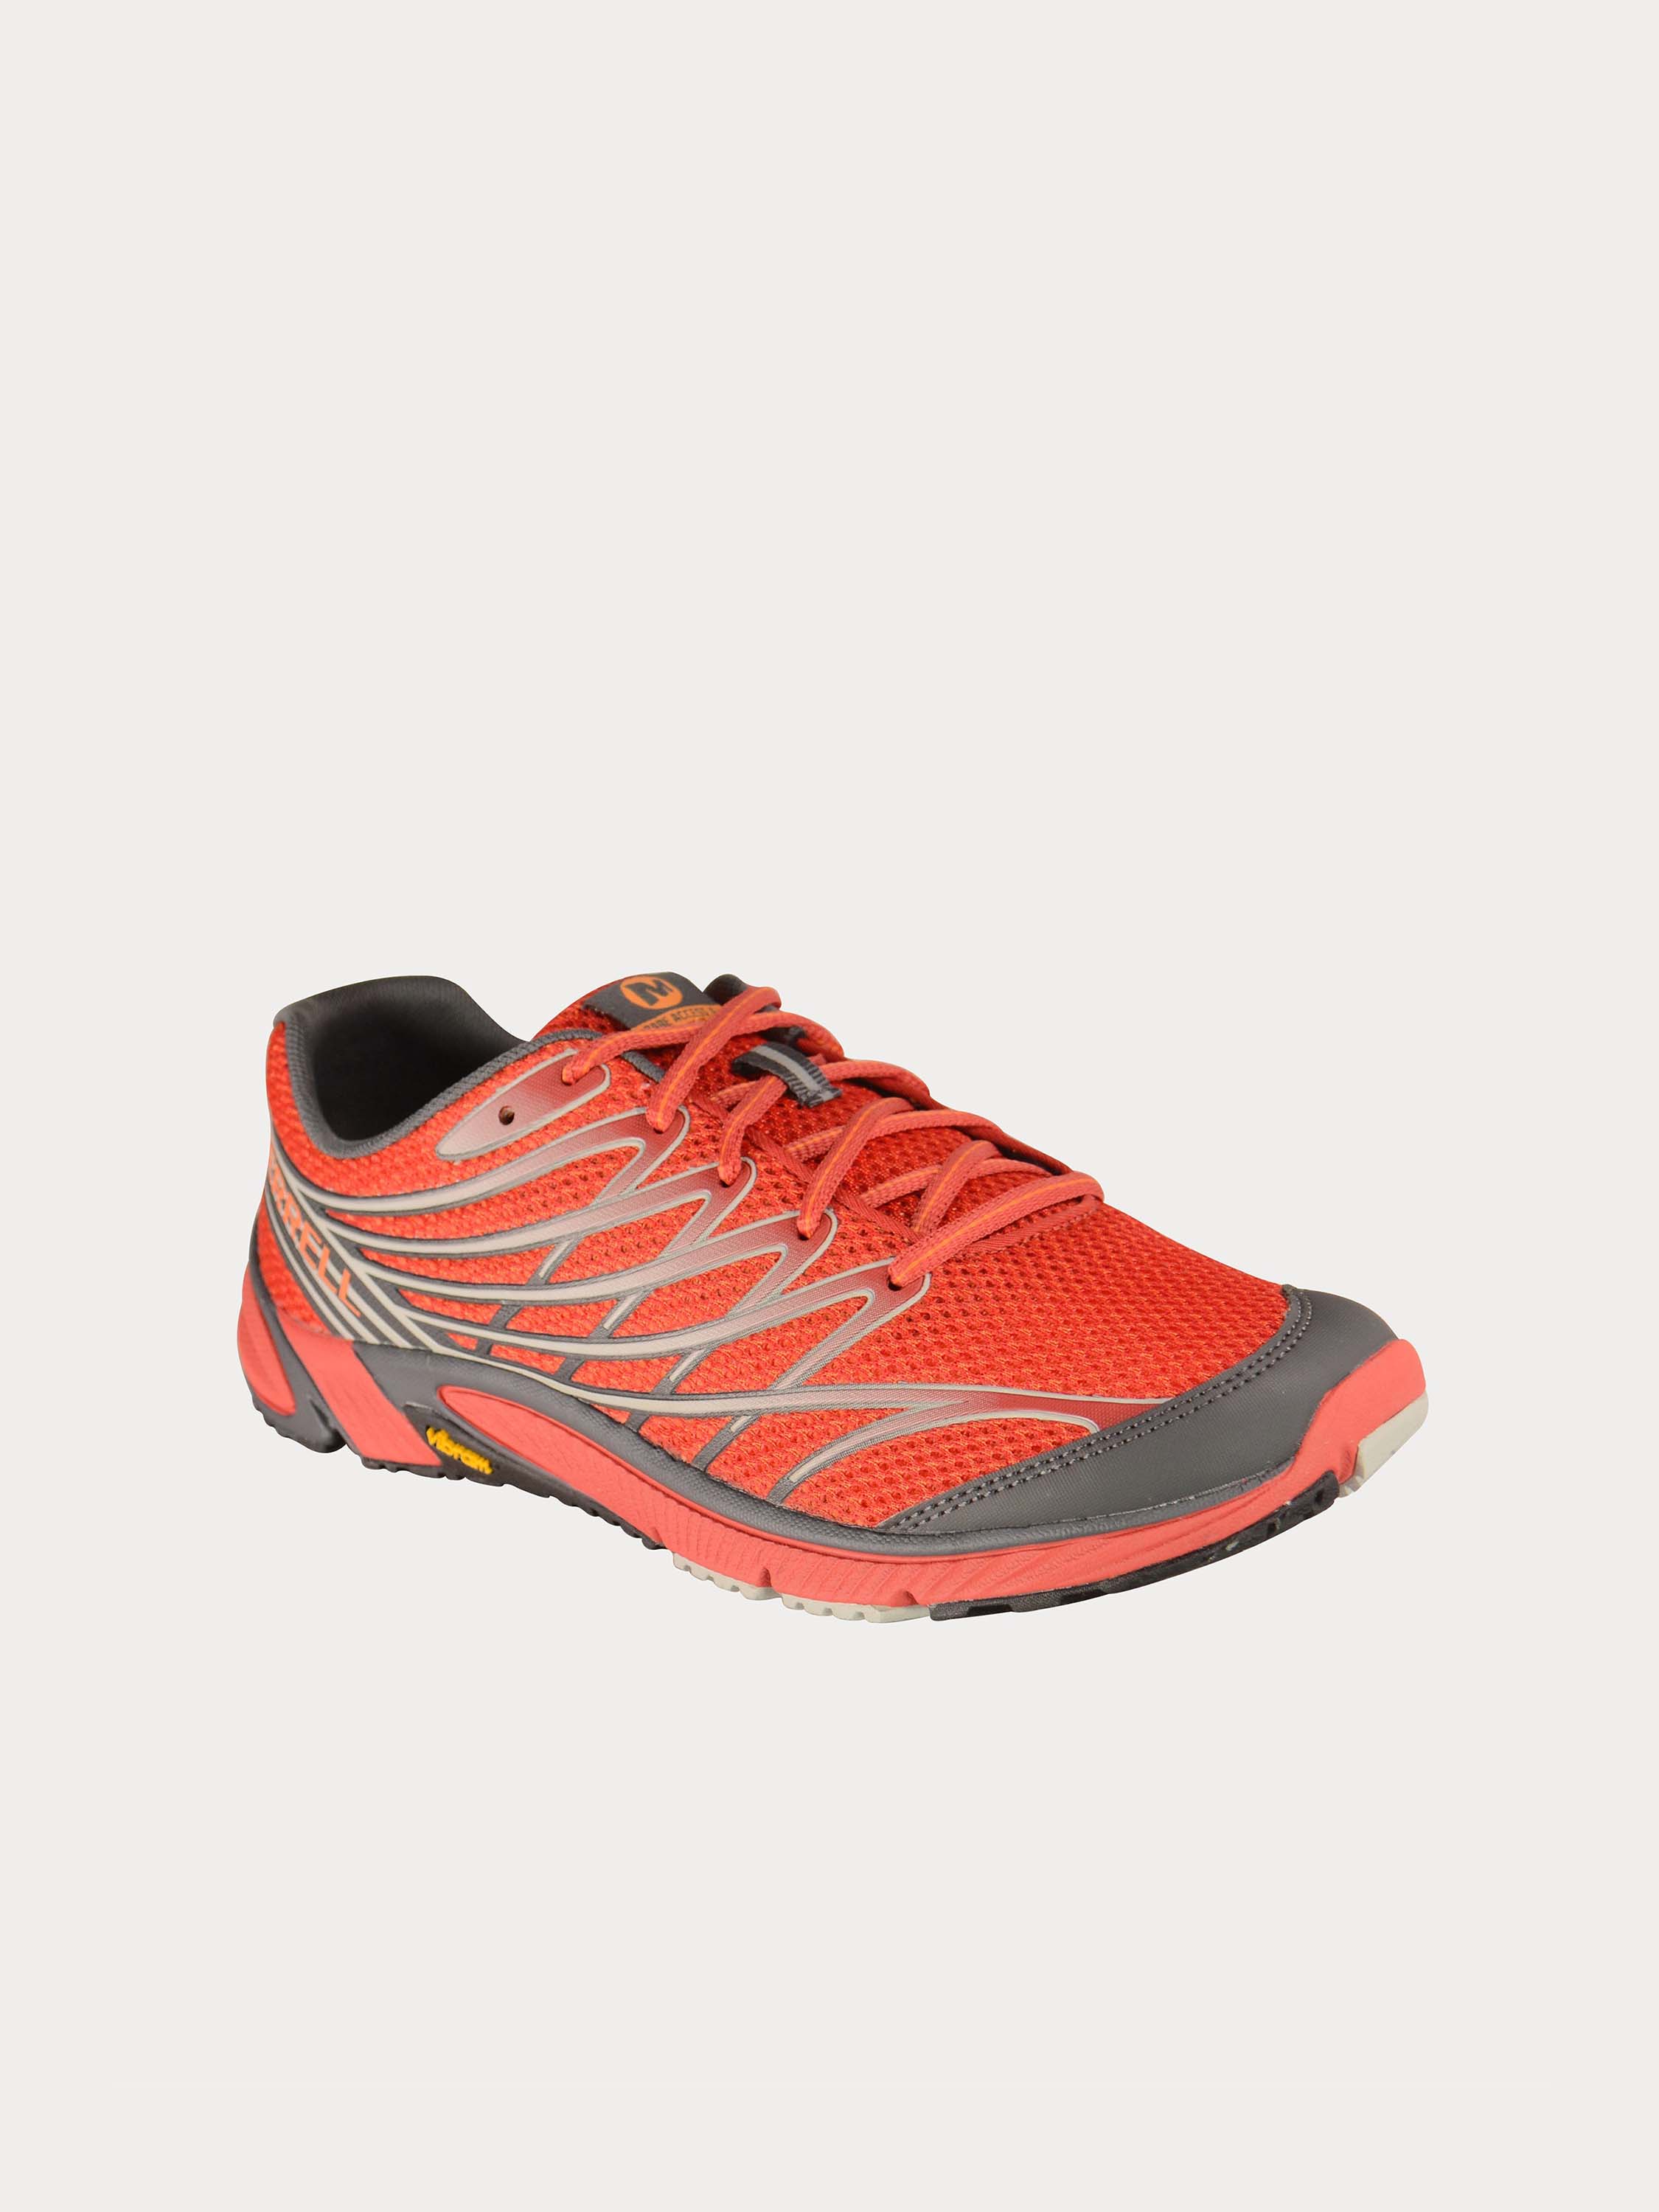 Merrell Men's Bare Access 4 Trail Running Shoes #color_Red